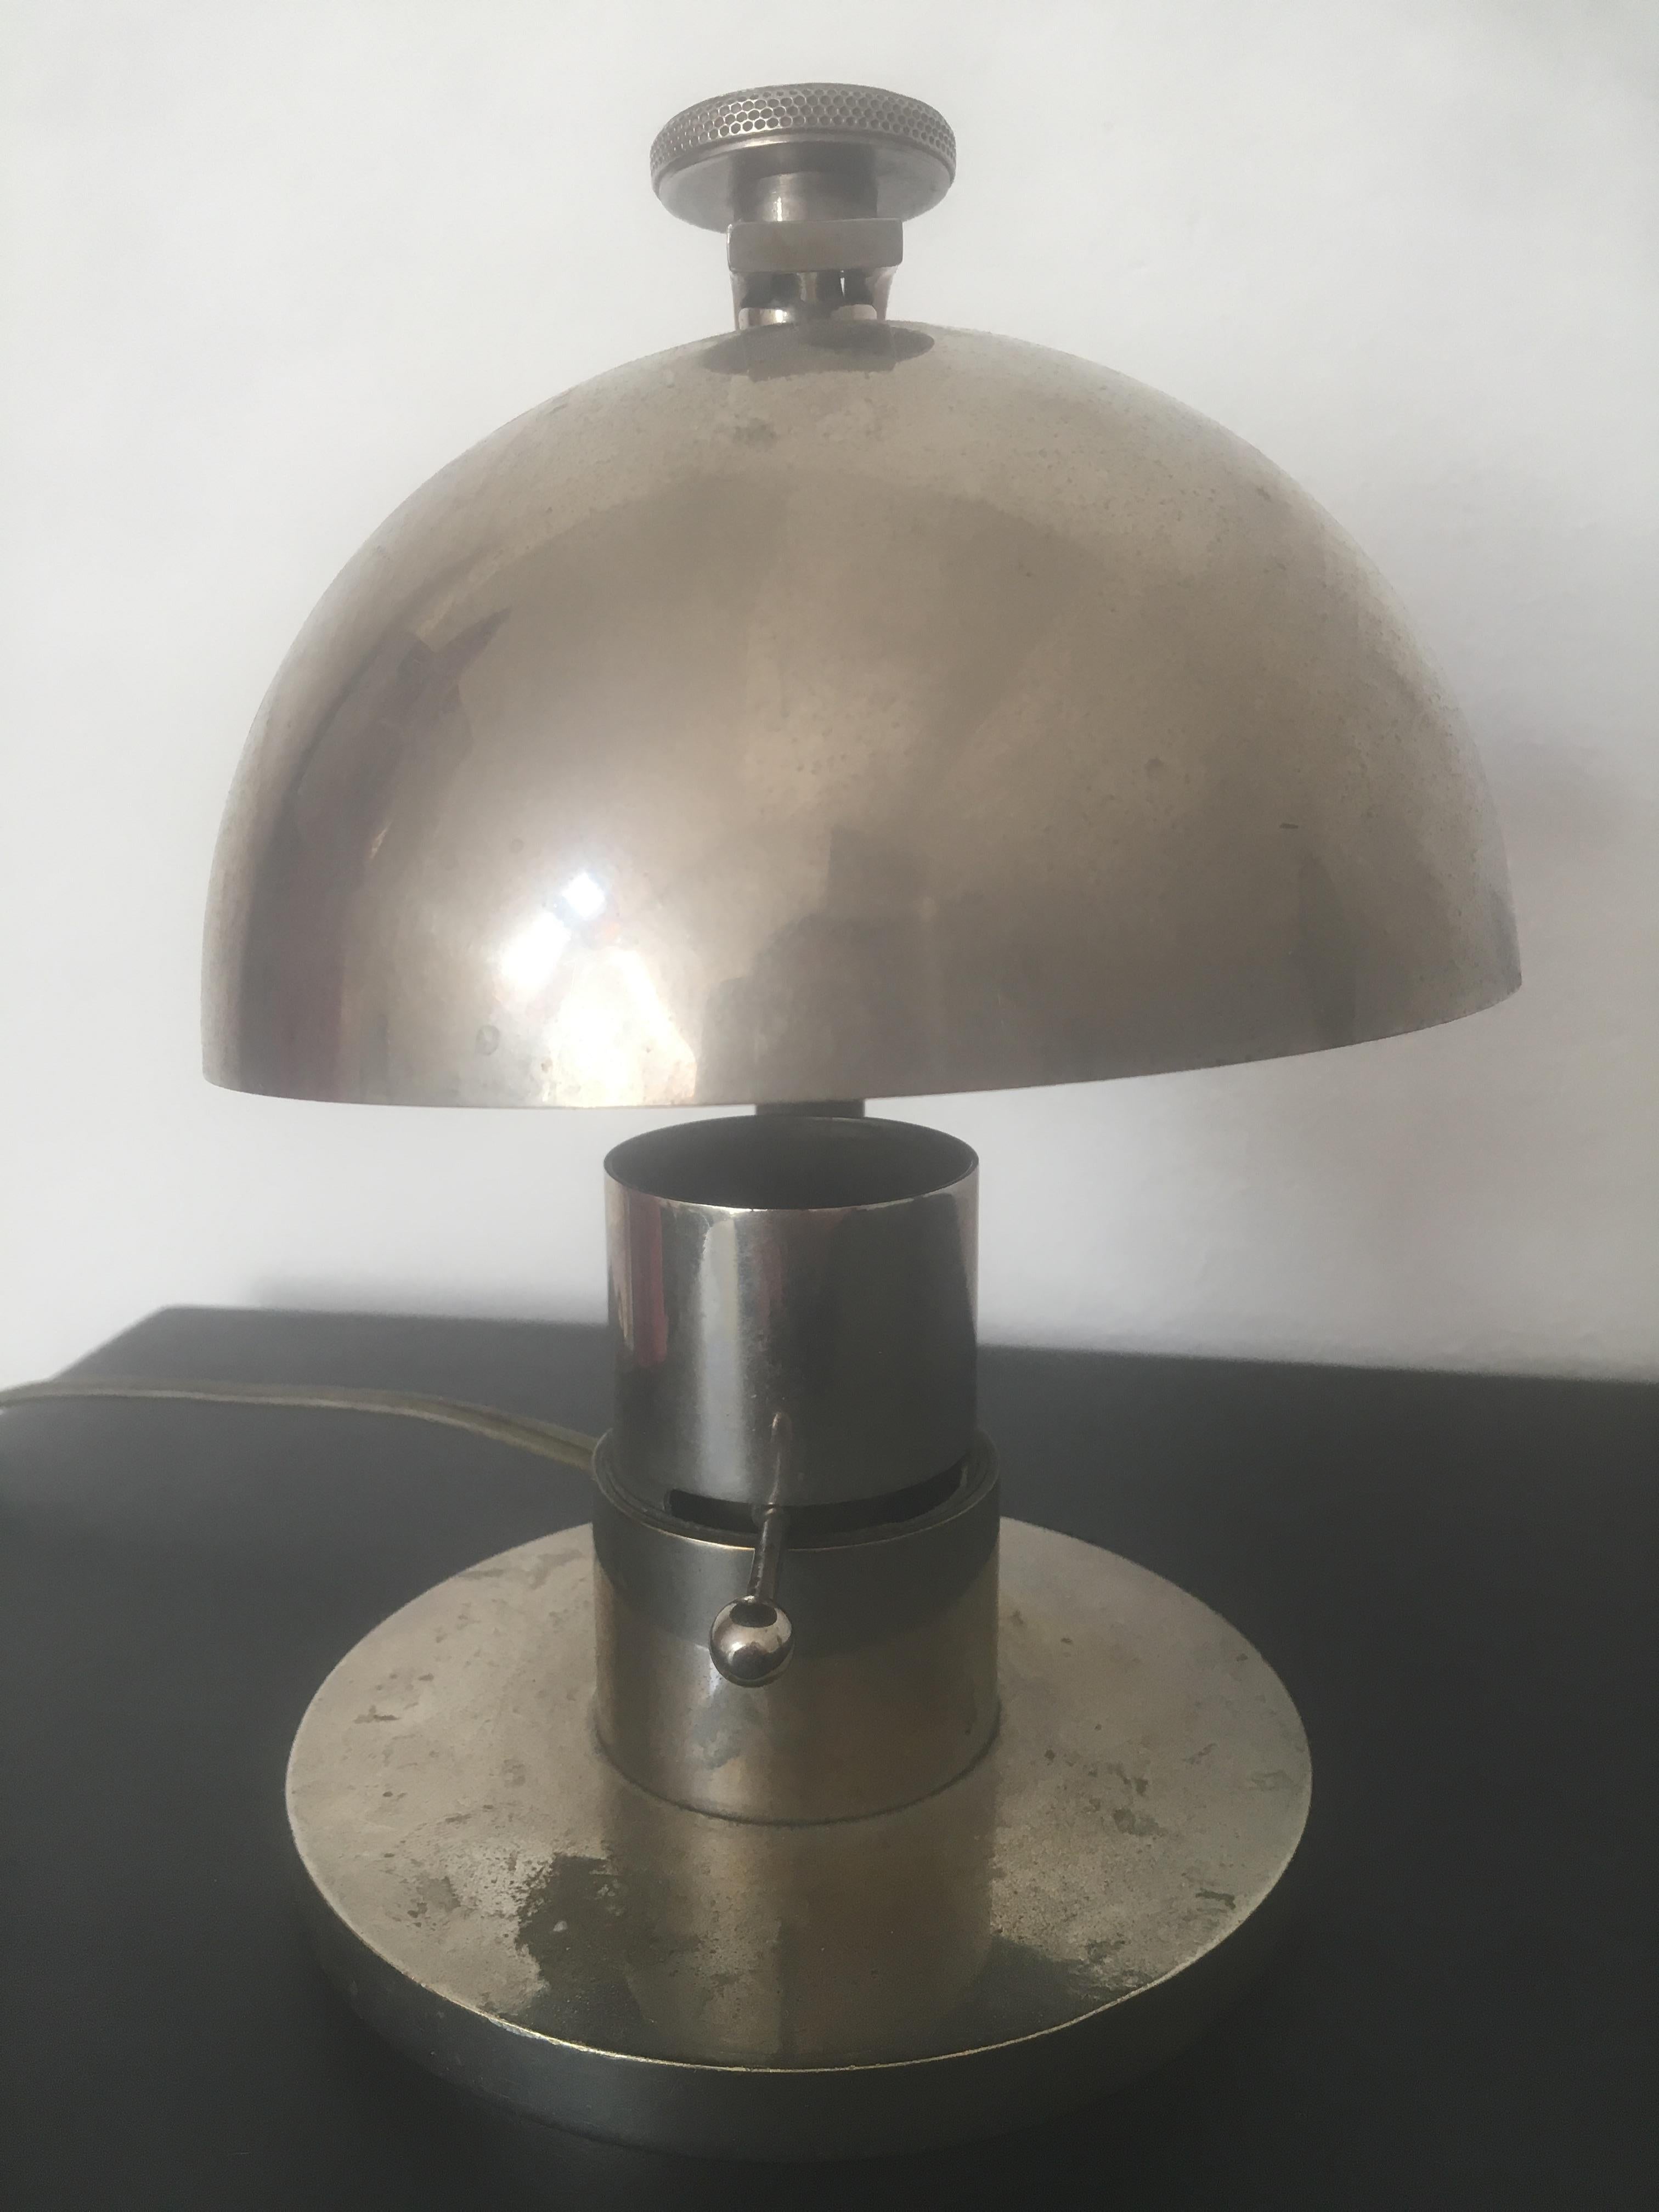 Mid-20th Century Maison Desny Art Deco Modernist Nickeled Metal Table Lamp, French, 1930s For Sale